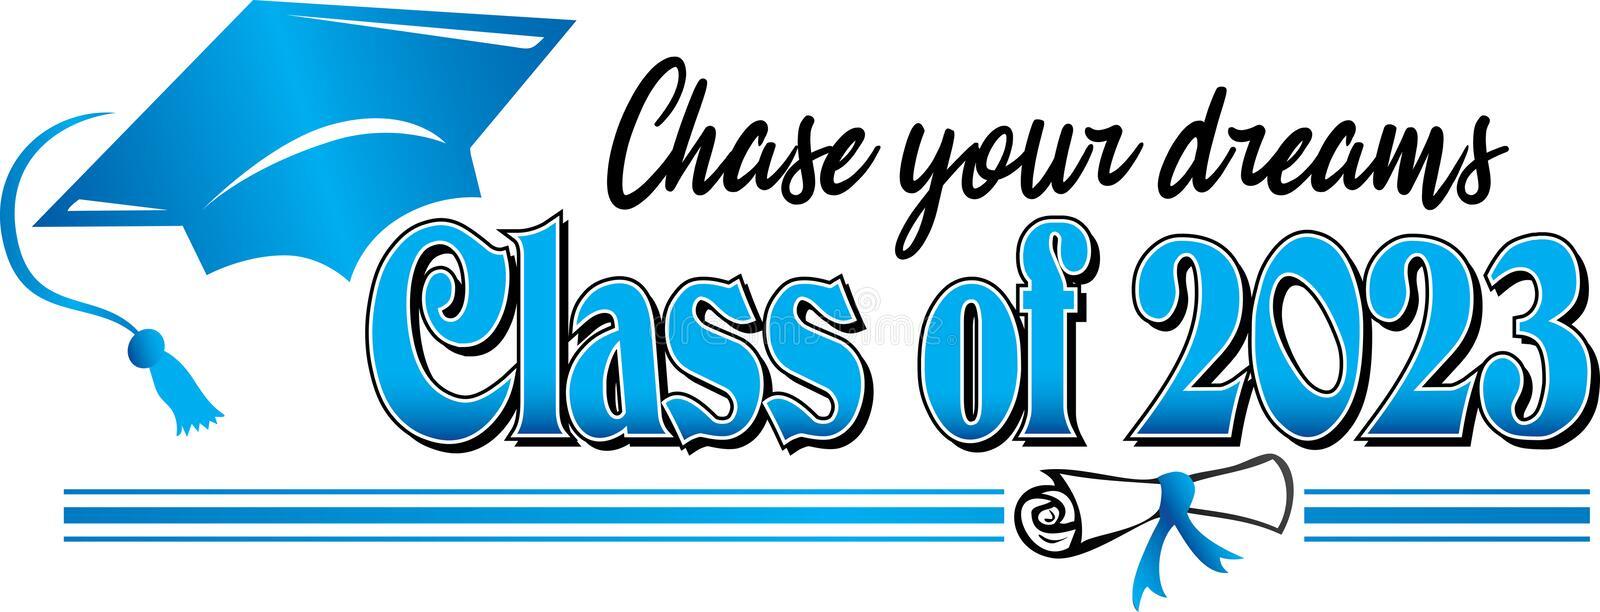 Chase your dreams Class of 2023